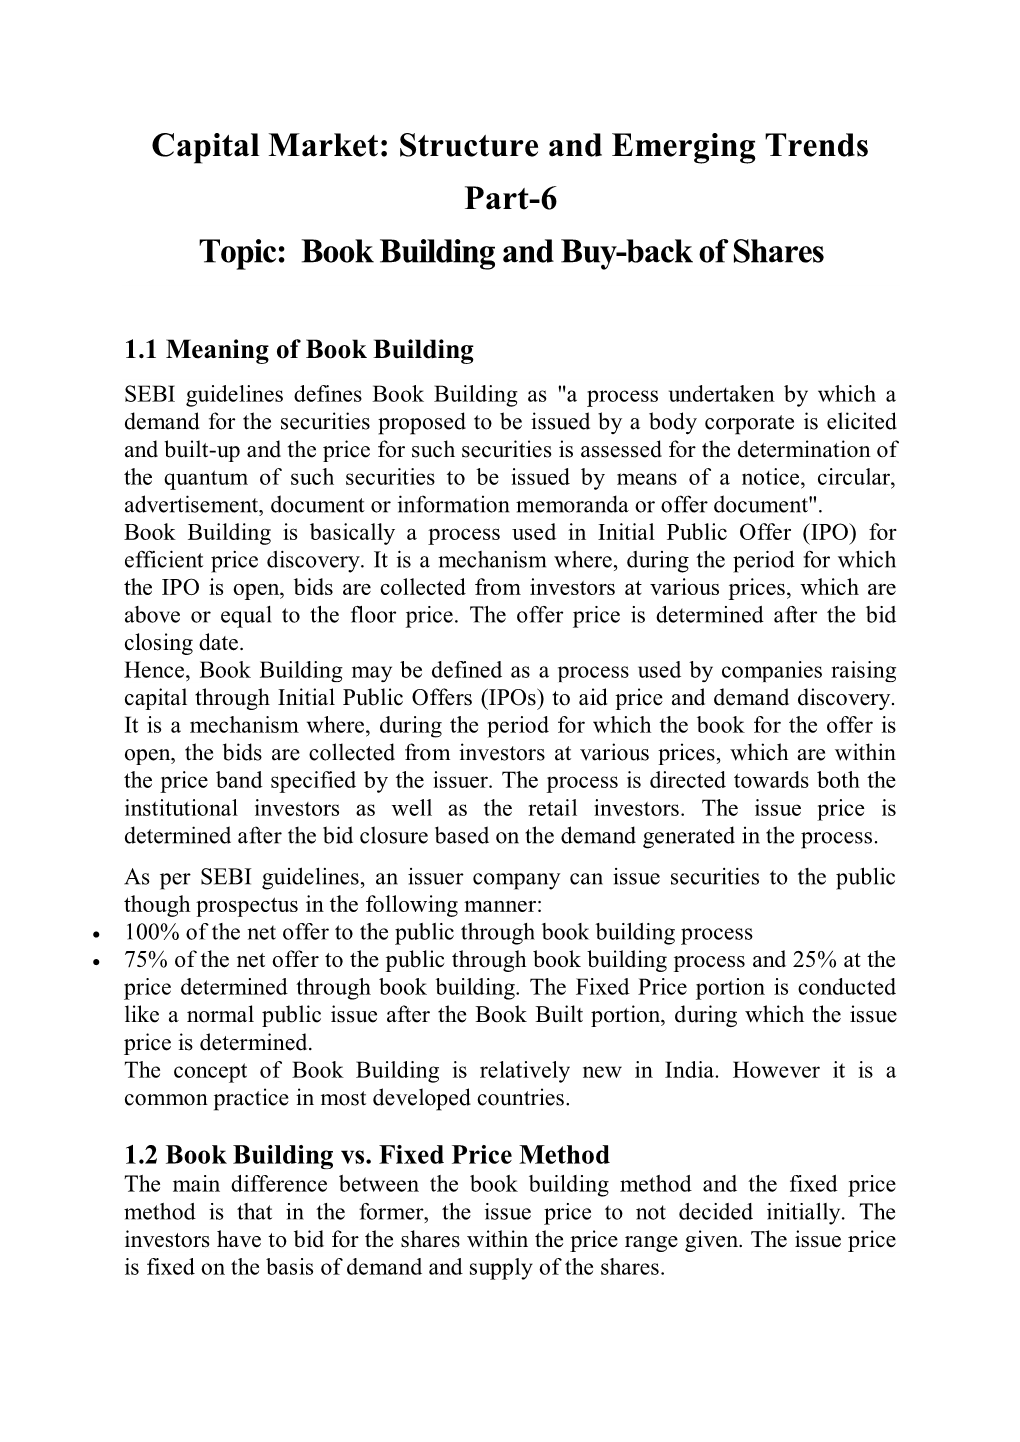 Capital Market: Structure and Emerging Trends Part-6 Topic: Book Building and Buy-Back of Shares